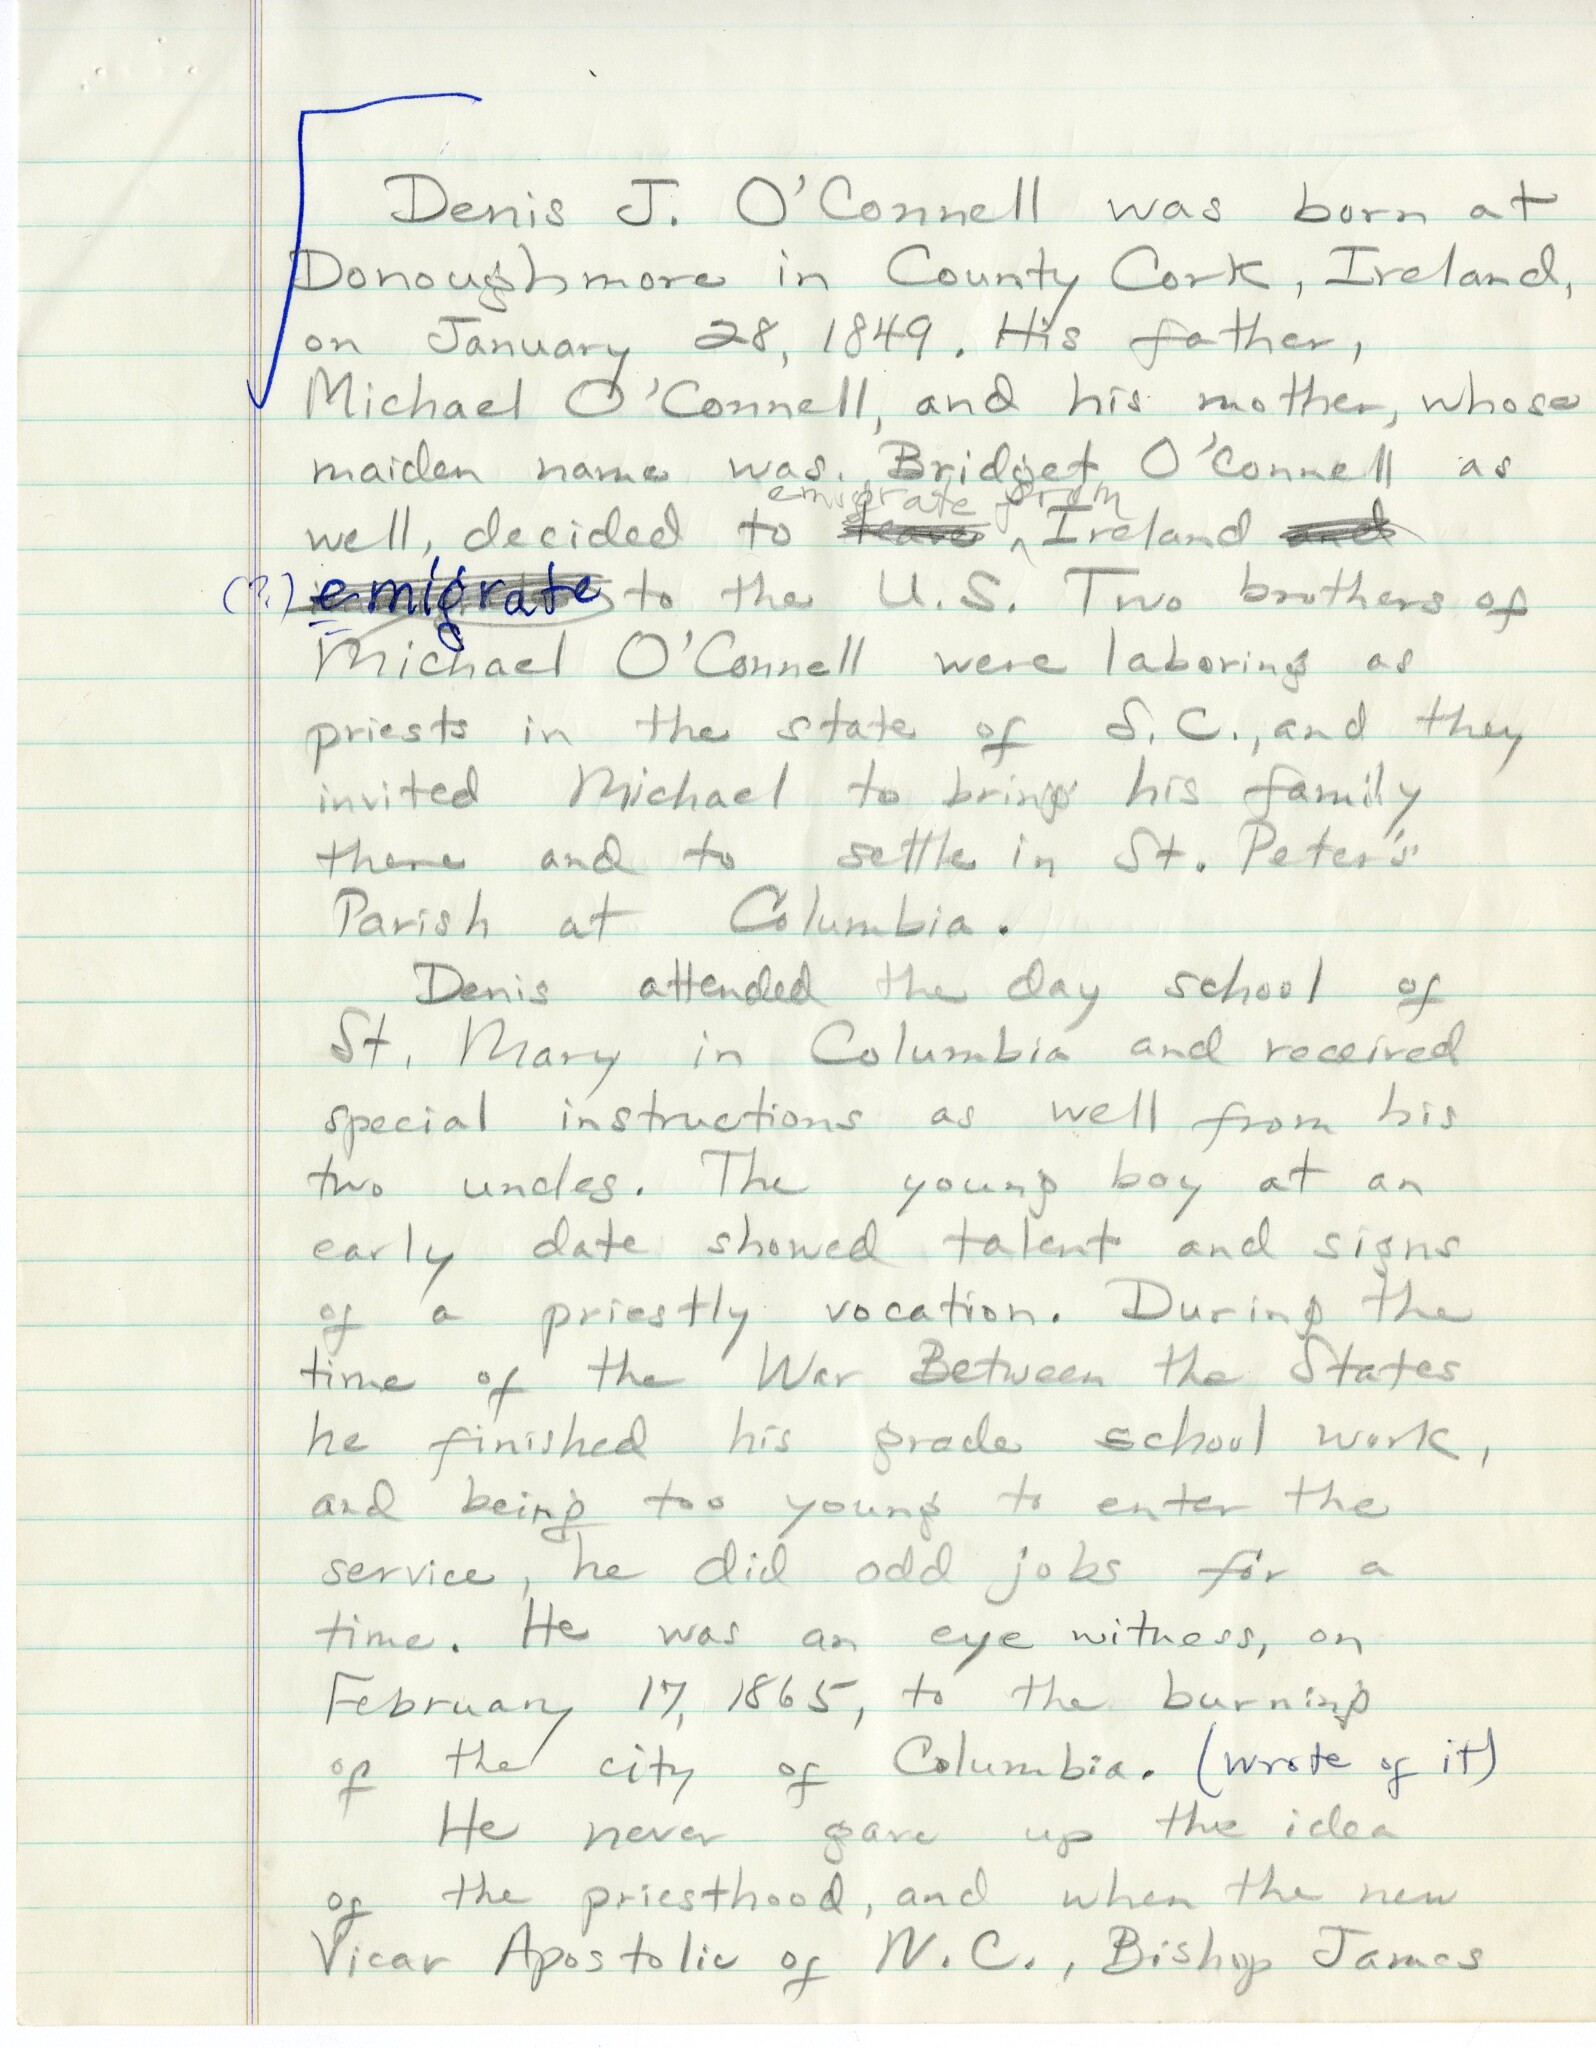 NOTES ON BISHOP O'CONNELL VIA WM. B. WHITE, JR. @ WU'S PETTIS ARCHIVES